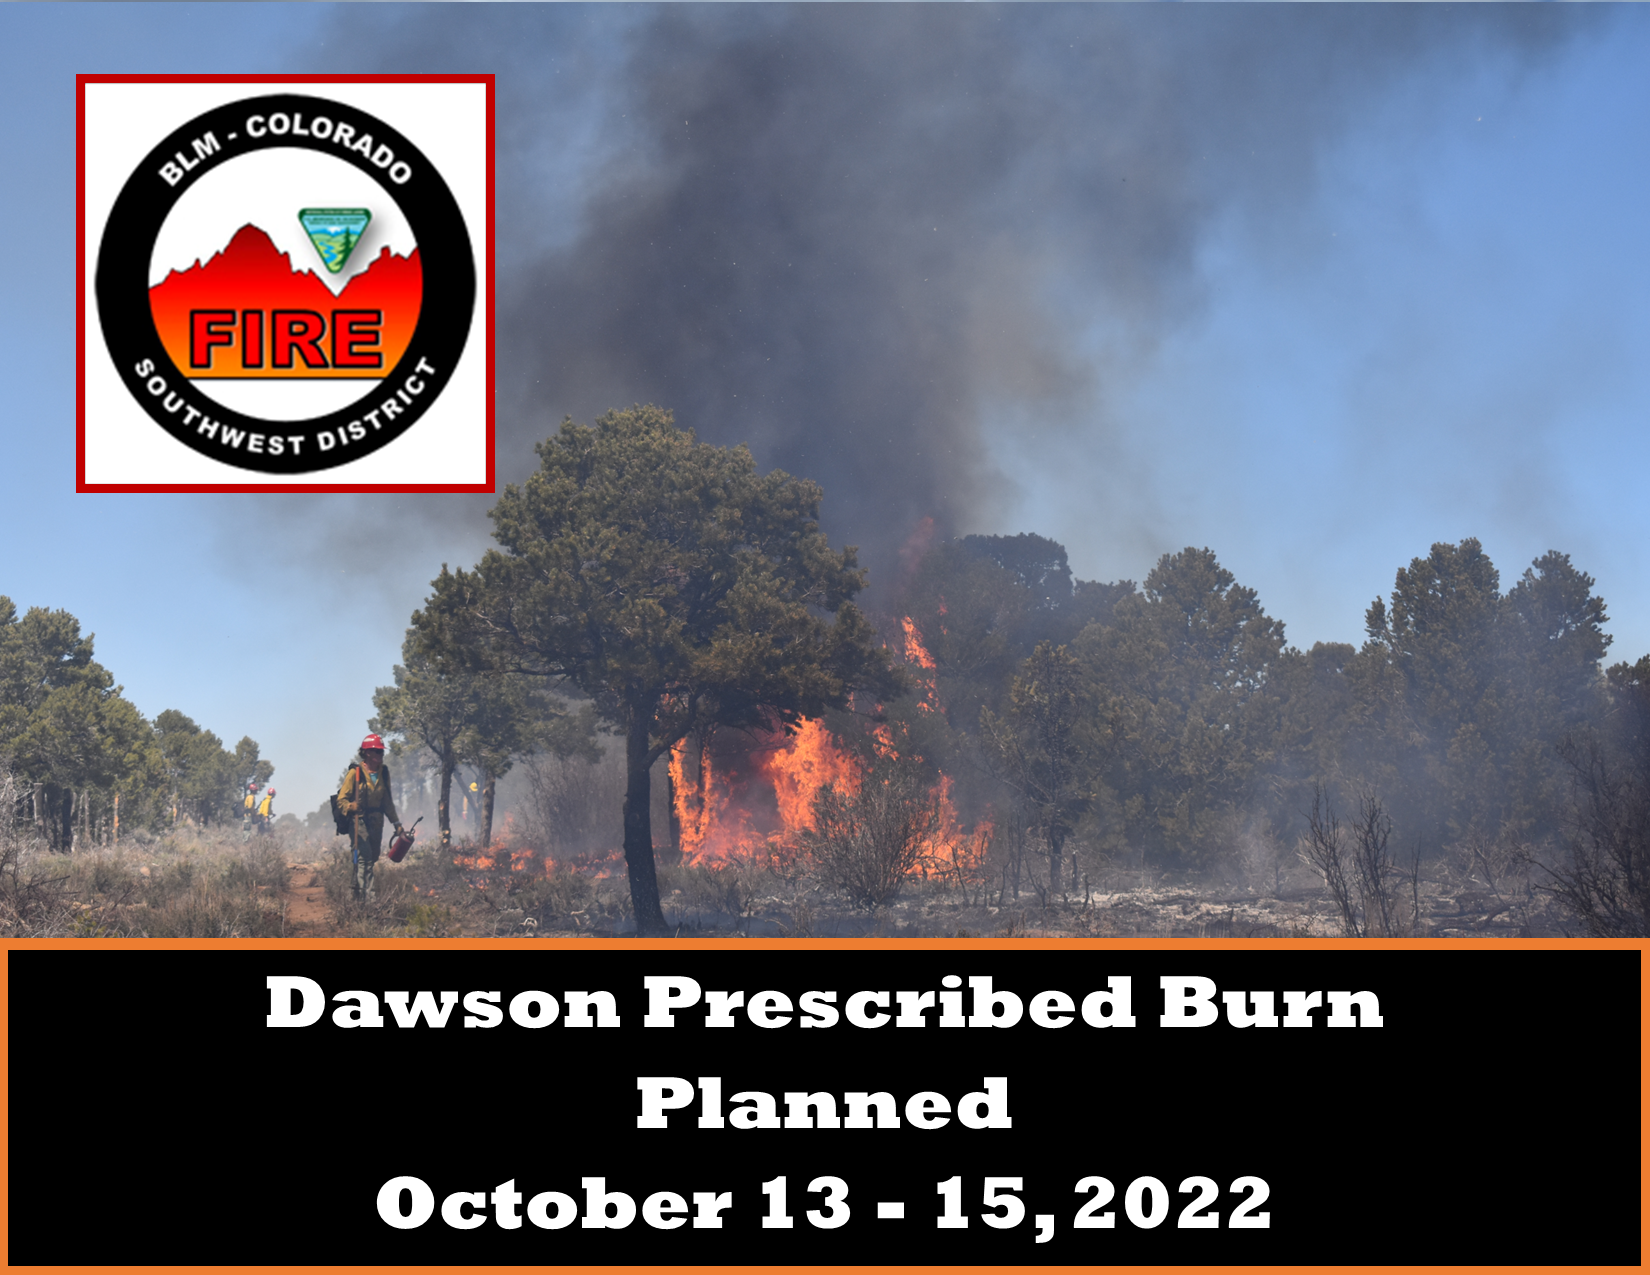 BLM Southwest District Fire - Dawson Prescribed Burn Planned Oct. 13 - 15, 2022. Three wildland firefighters working on prescribed burn. Photo has trees, fire, smoke and blue sky.